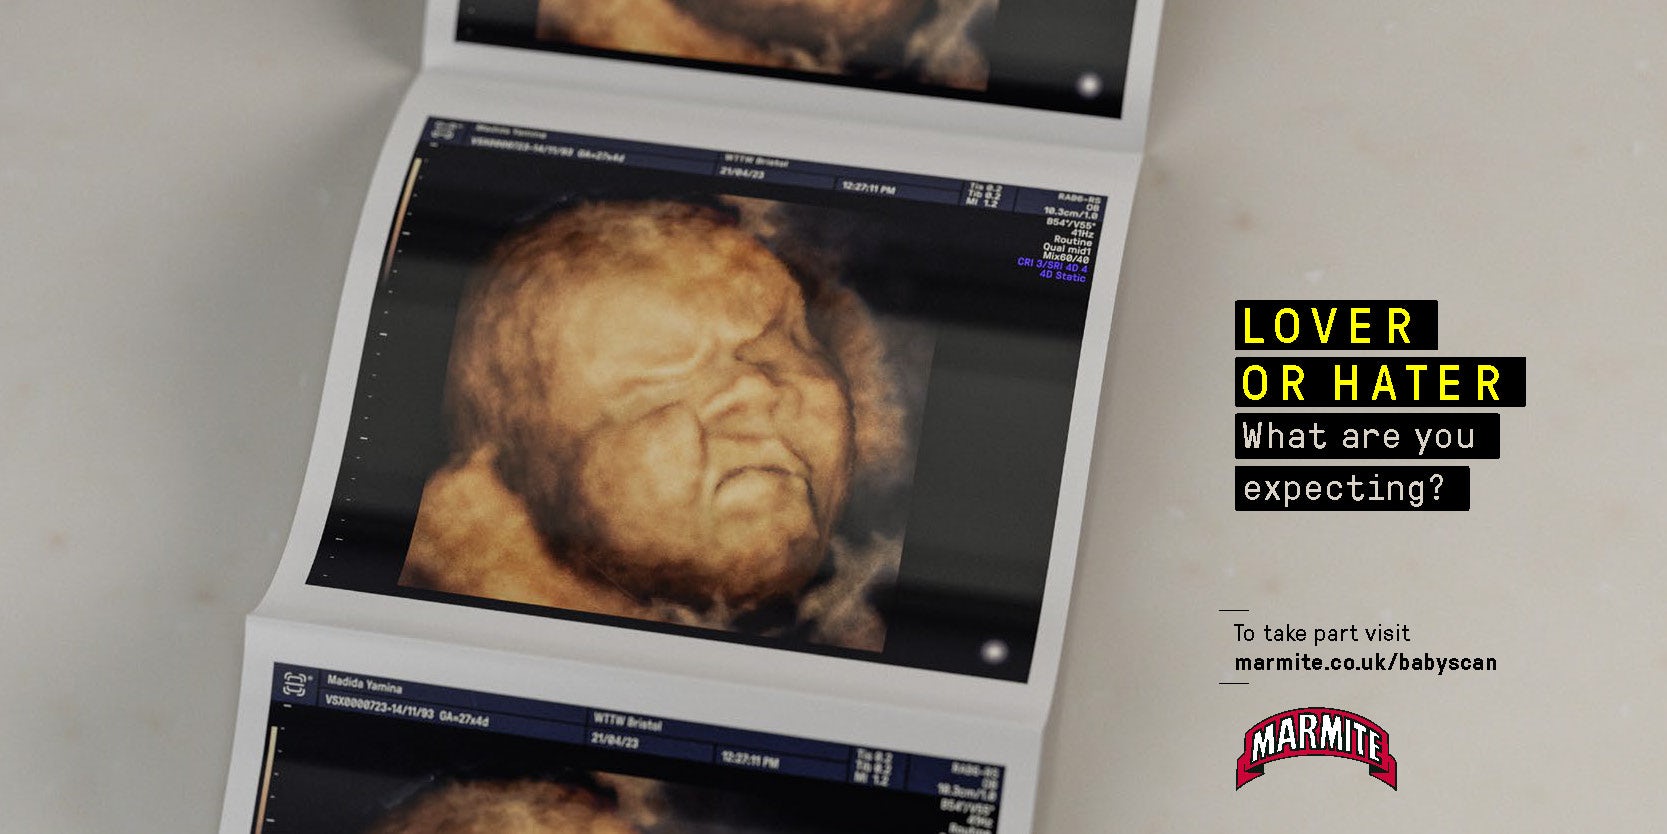 Image shows a Marmite ad featuring an ultrasound scan of a foetus appearing to frown